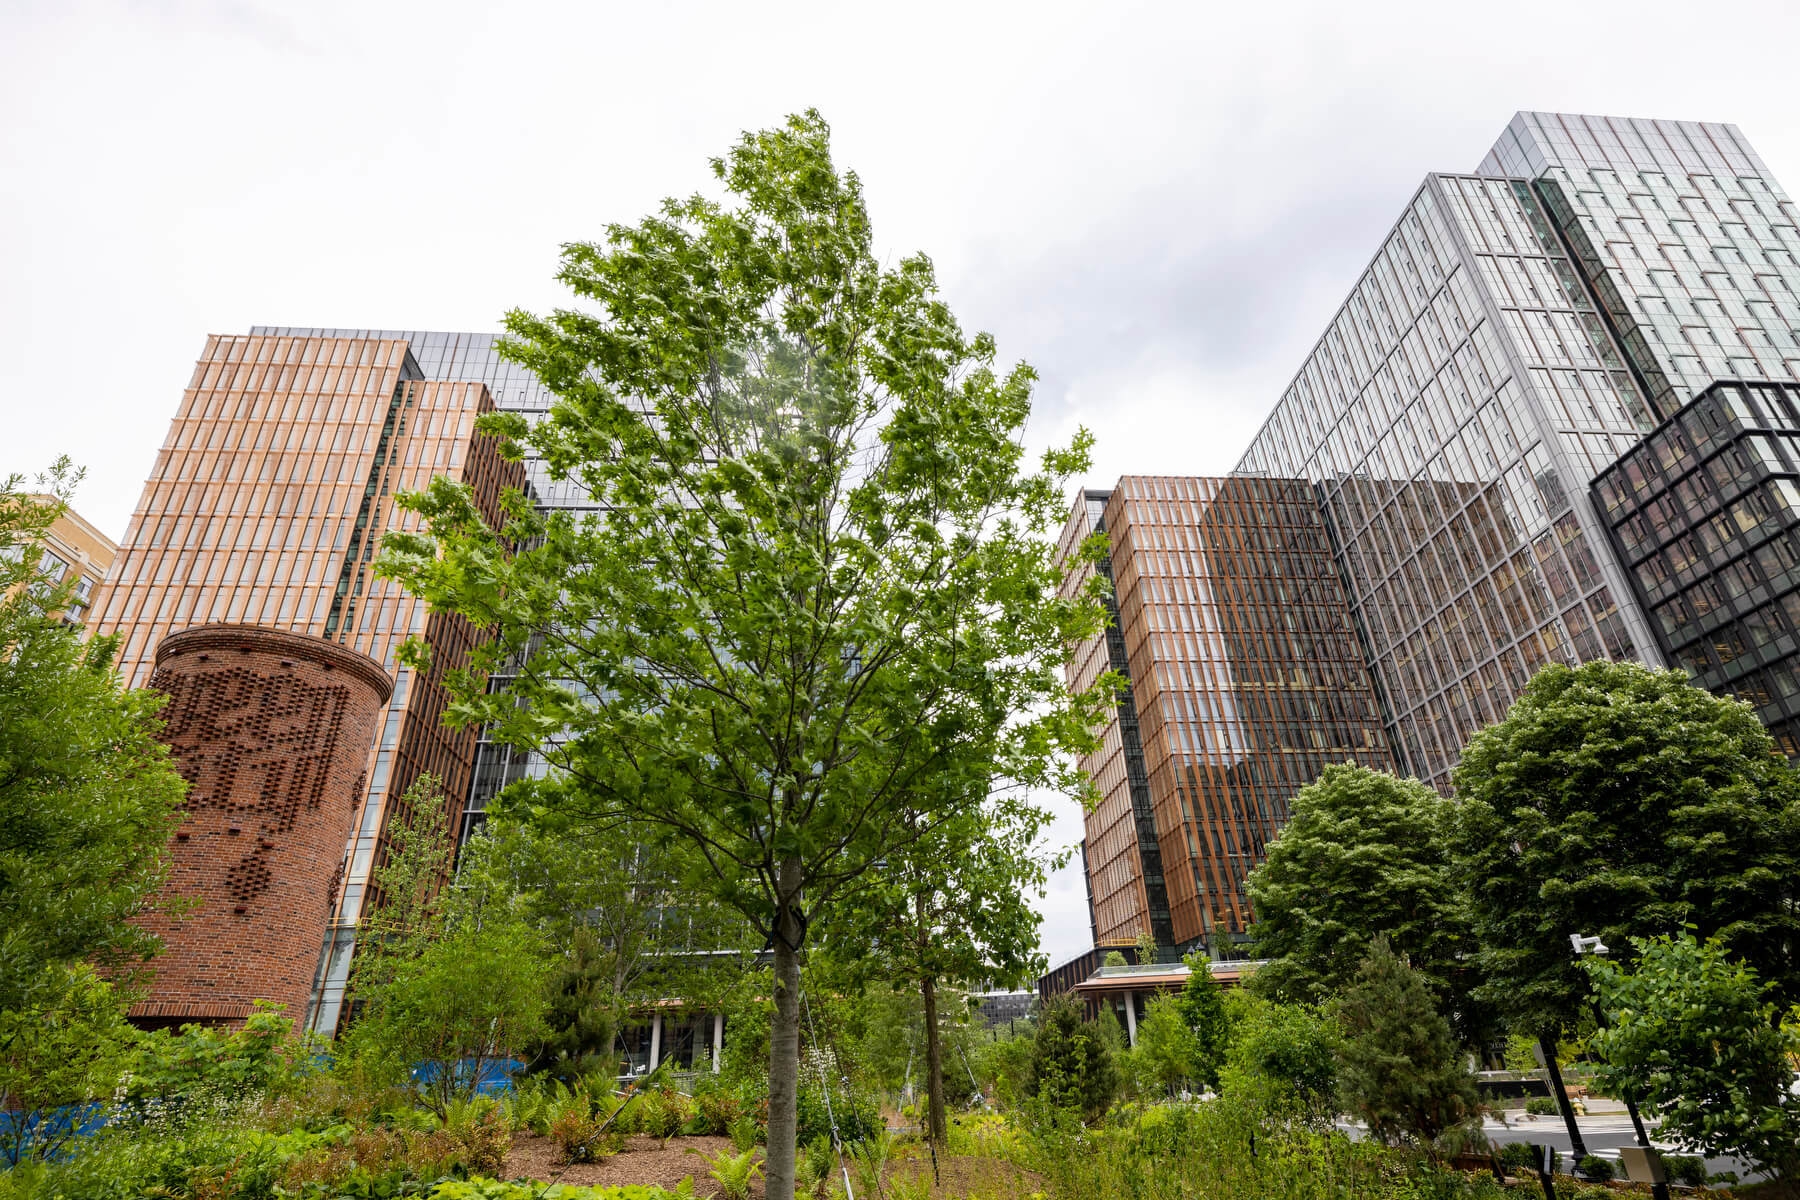 An image of the outside of Amazons HQ2. There are several tall towers in the background and trees in the foreground. 